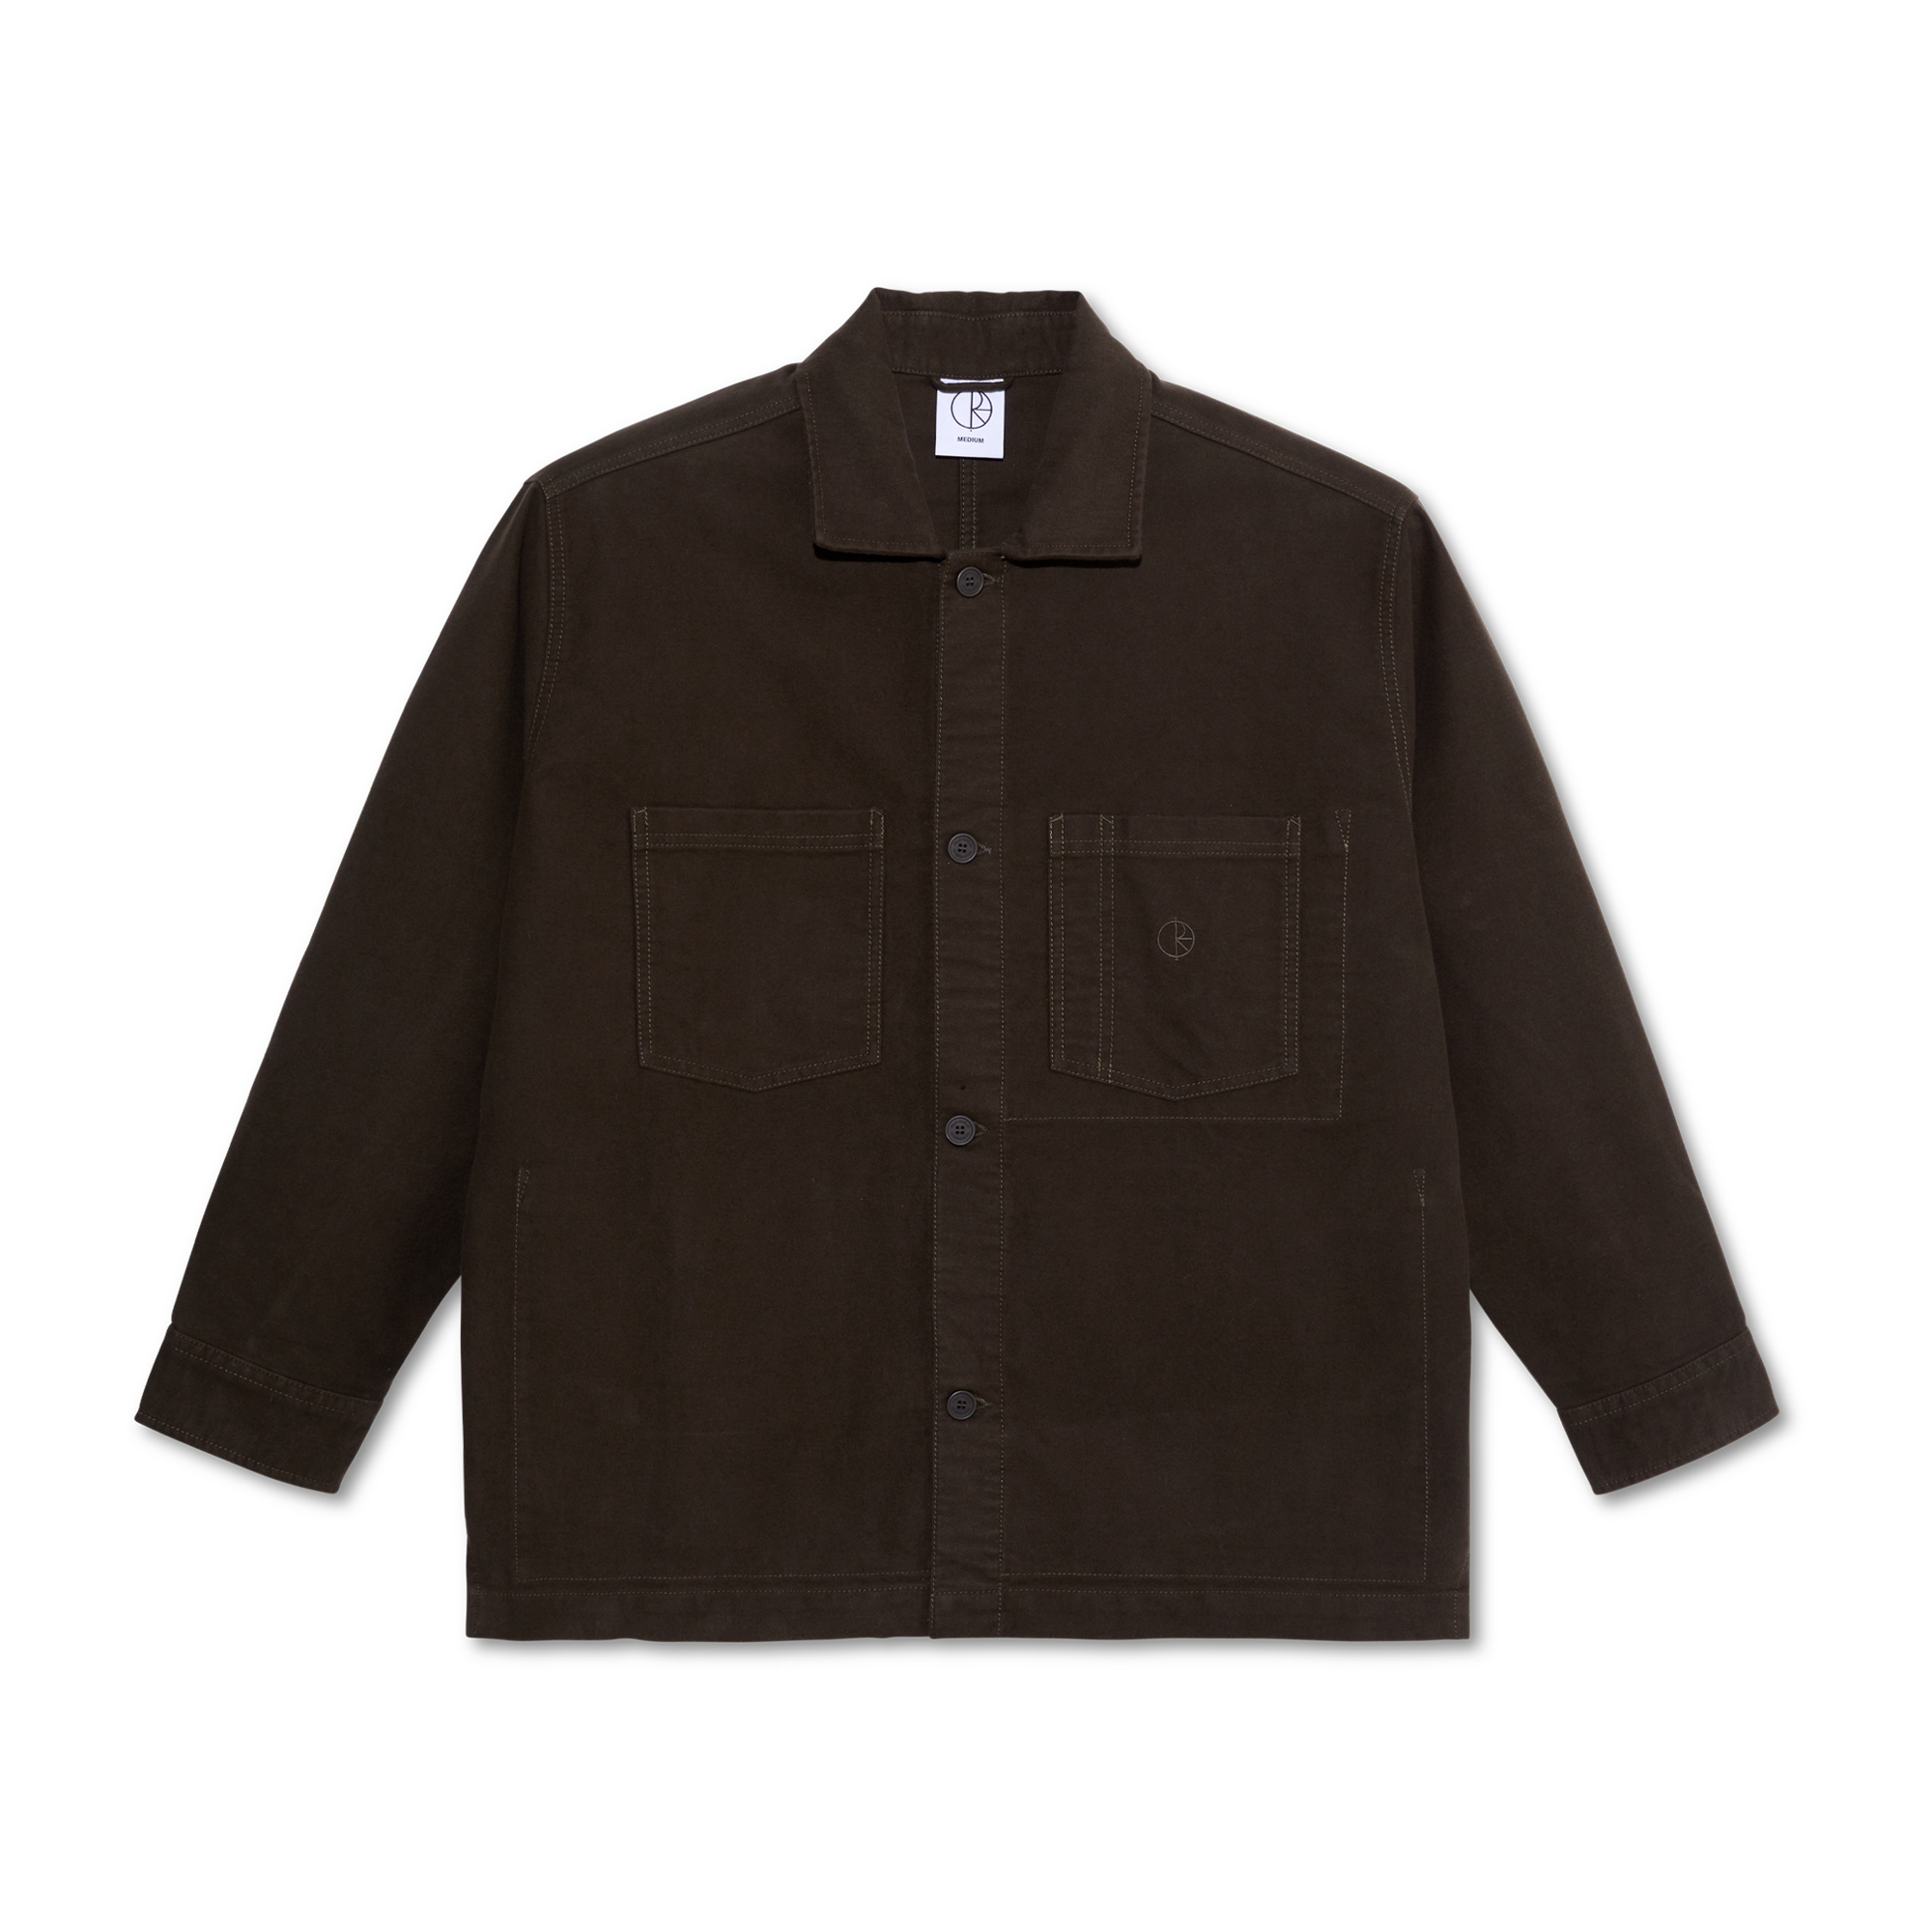 Polar Skate Co. Theodore Overshirt / Brushed Twill Brown